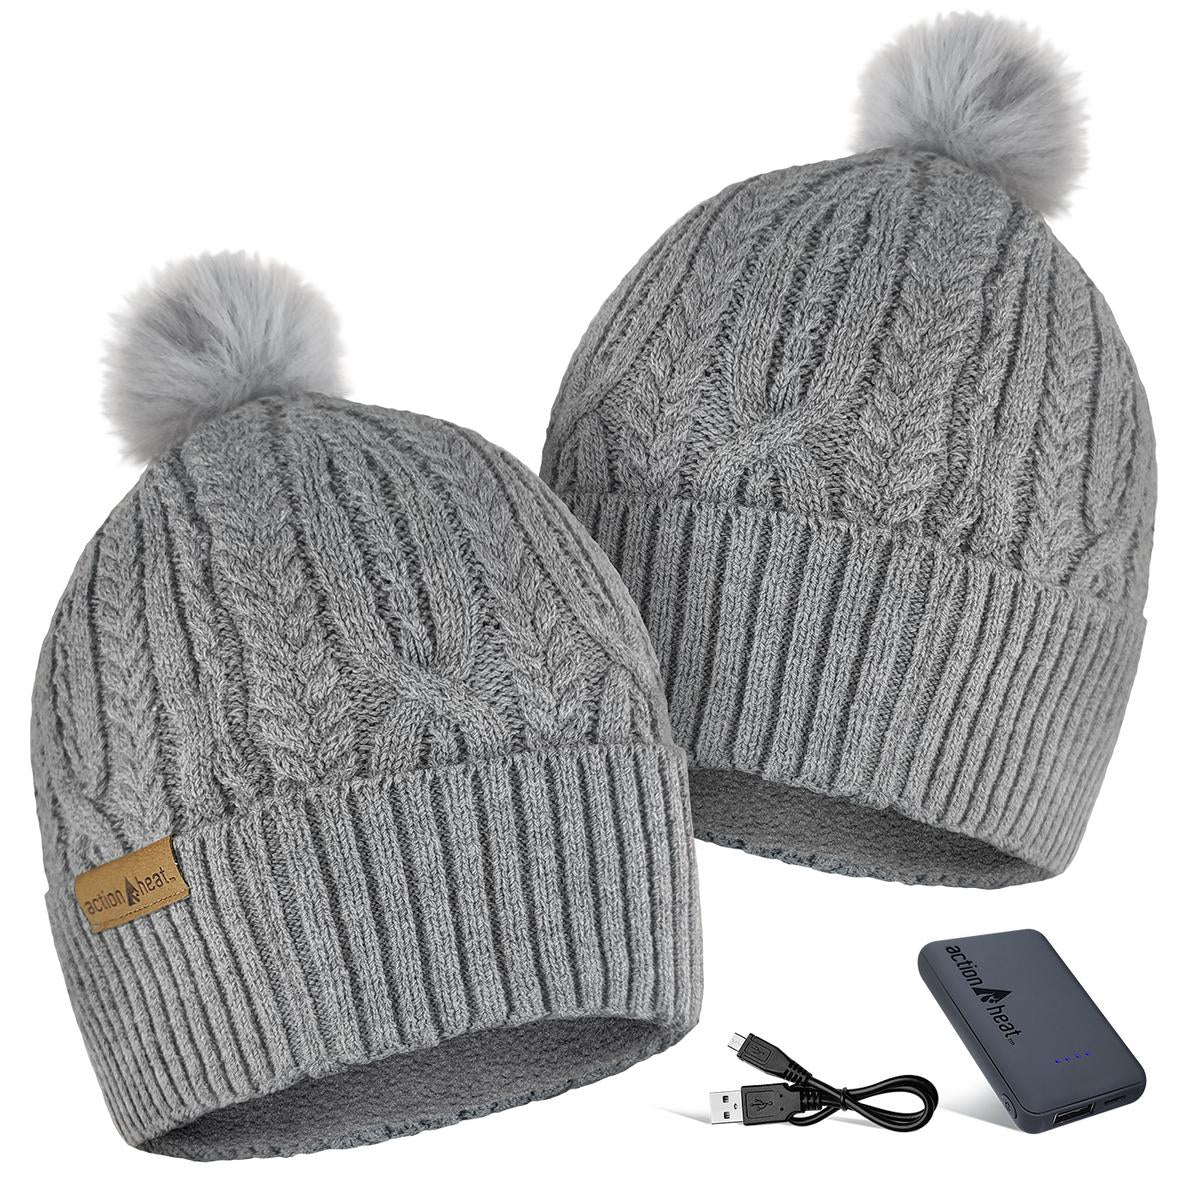 ActionHeat 5V Battery Heated Cable Knit Hat - Back